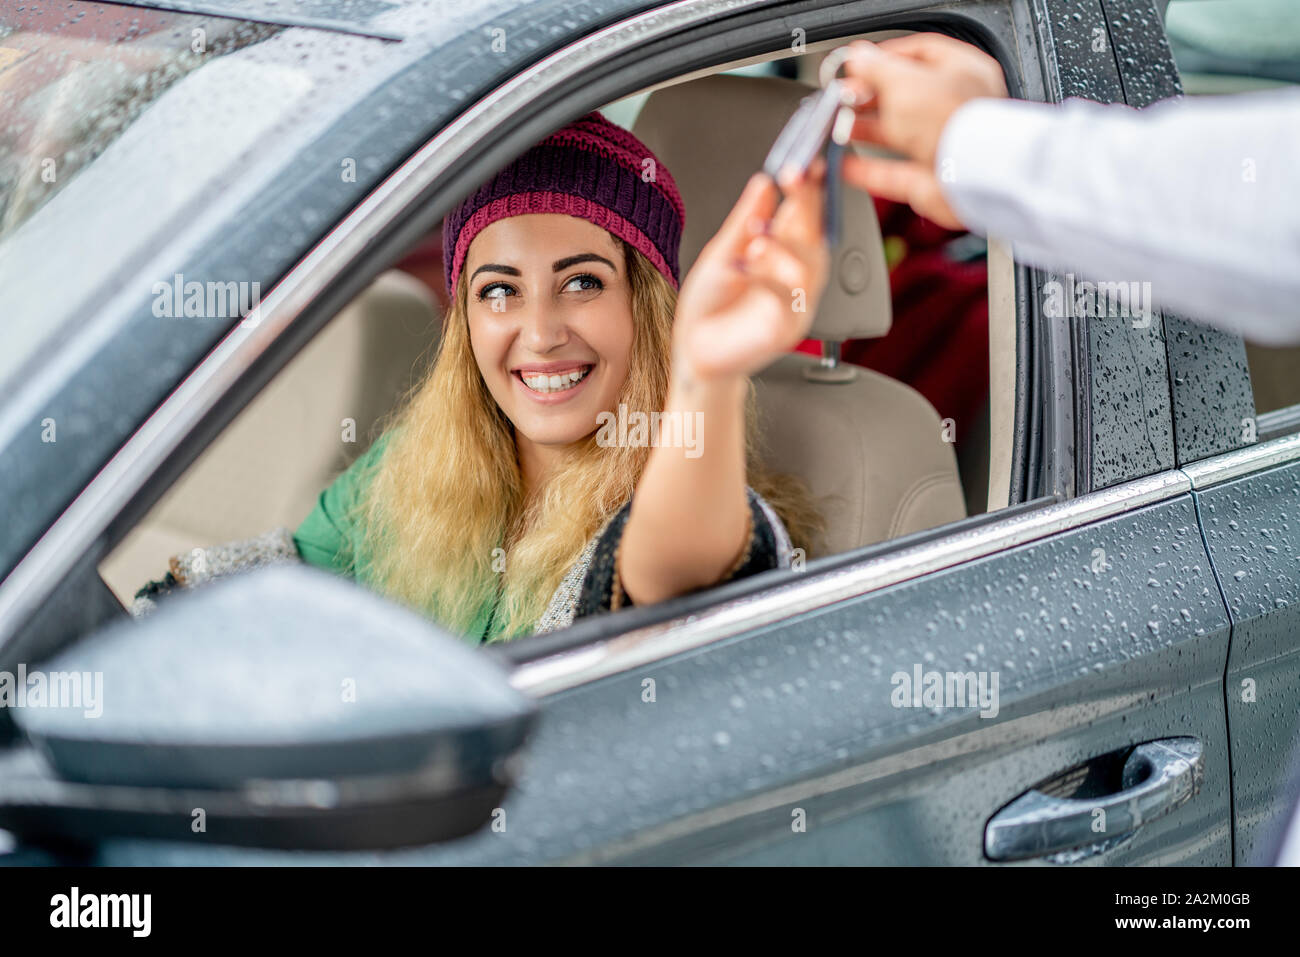 young woman take the key from valet to drive her car. Stock Photo